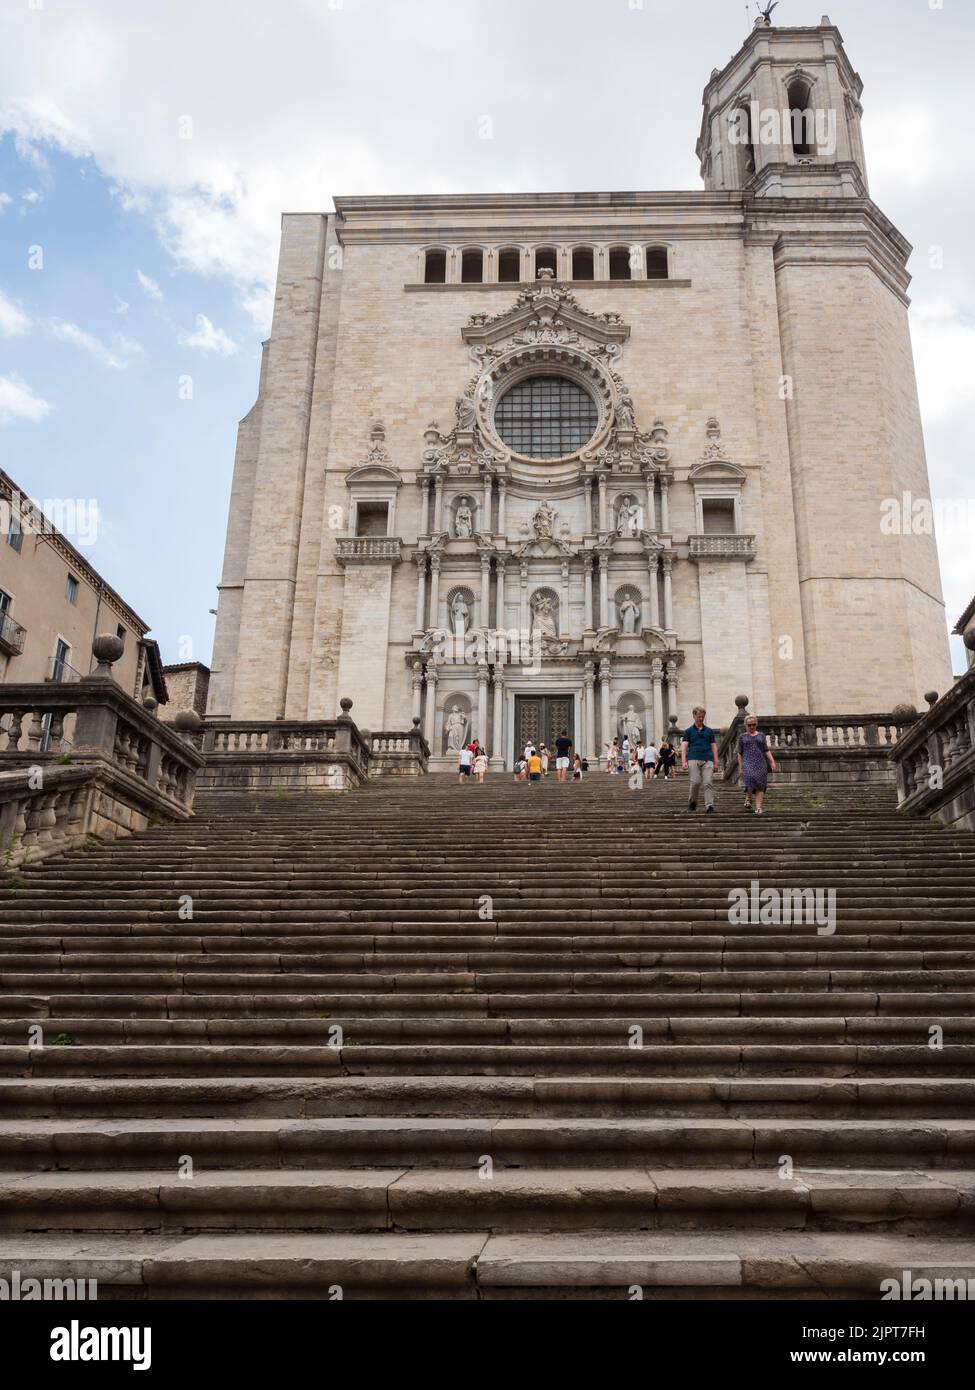 Girona, Spain - 26 June 2022: Entrance to the the ancient cathedral of Girona (Catalunia/Spain) Stock Photo